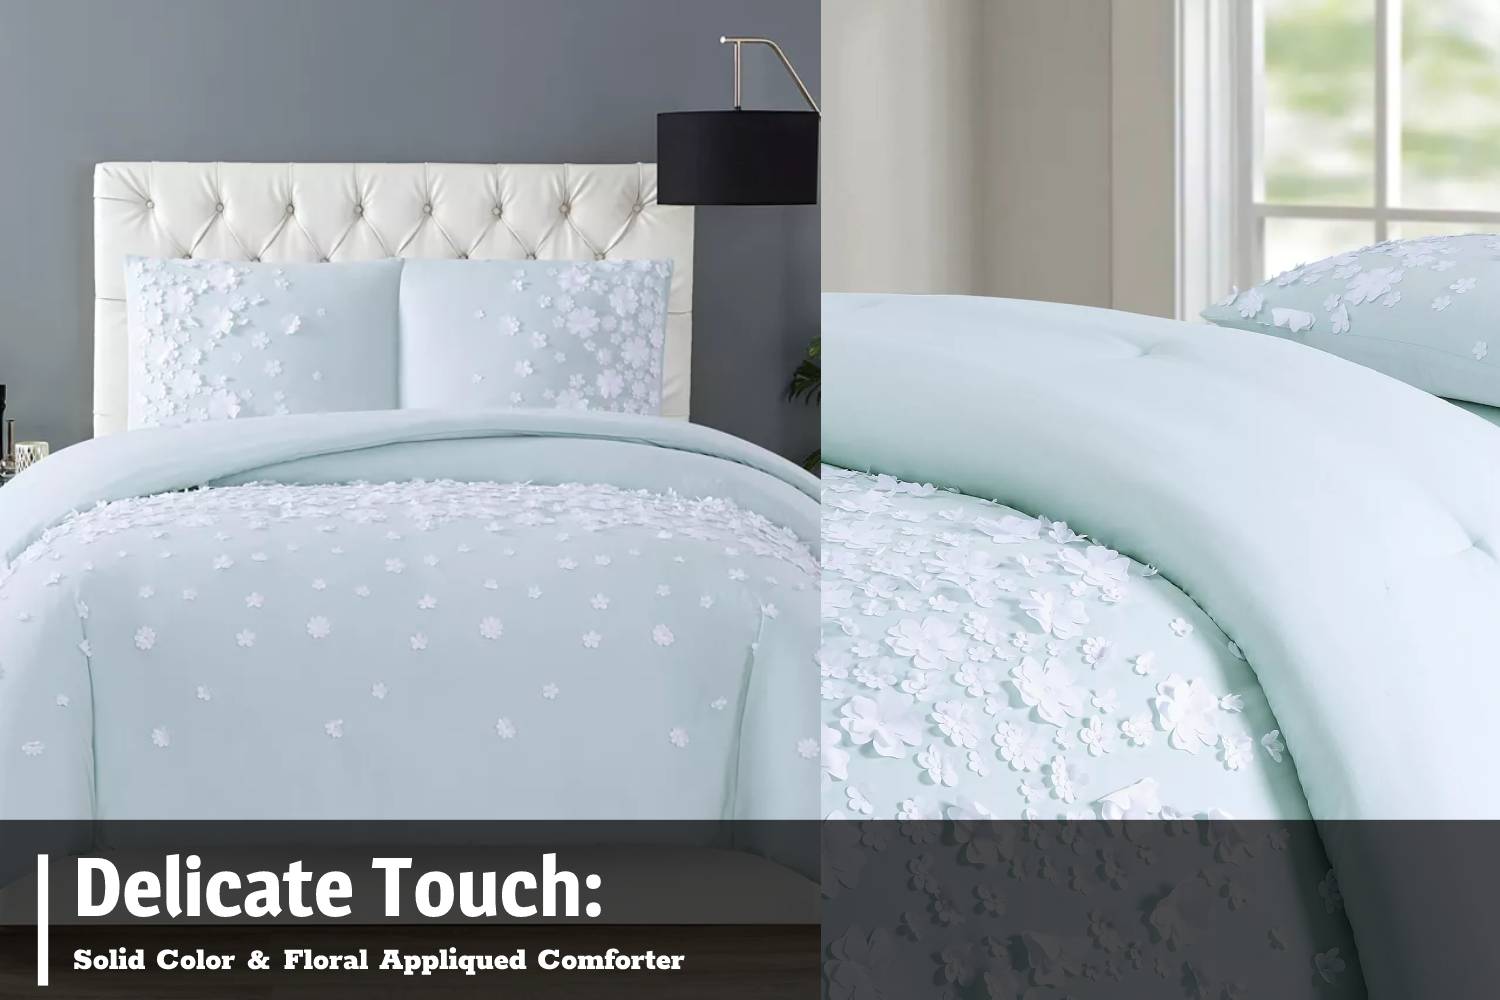 Delicate touch: Solid color & floral appliqued flowers comforter